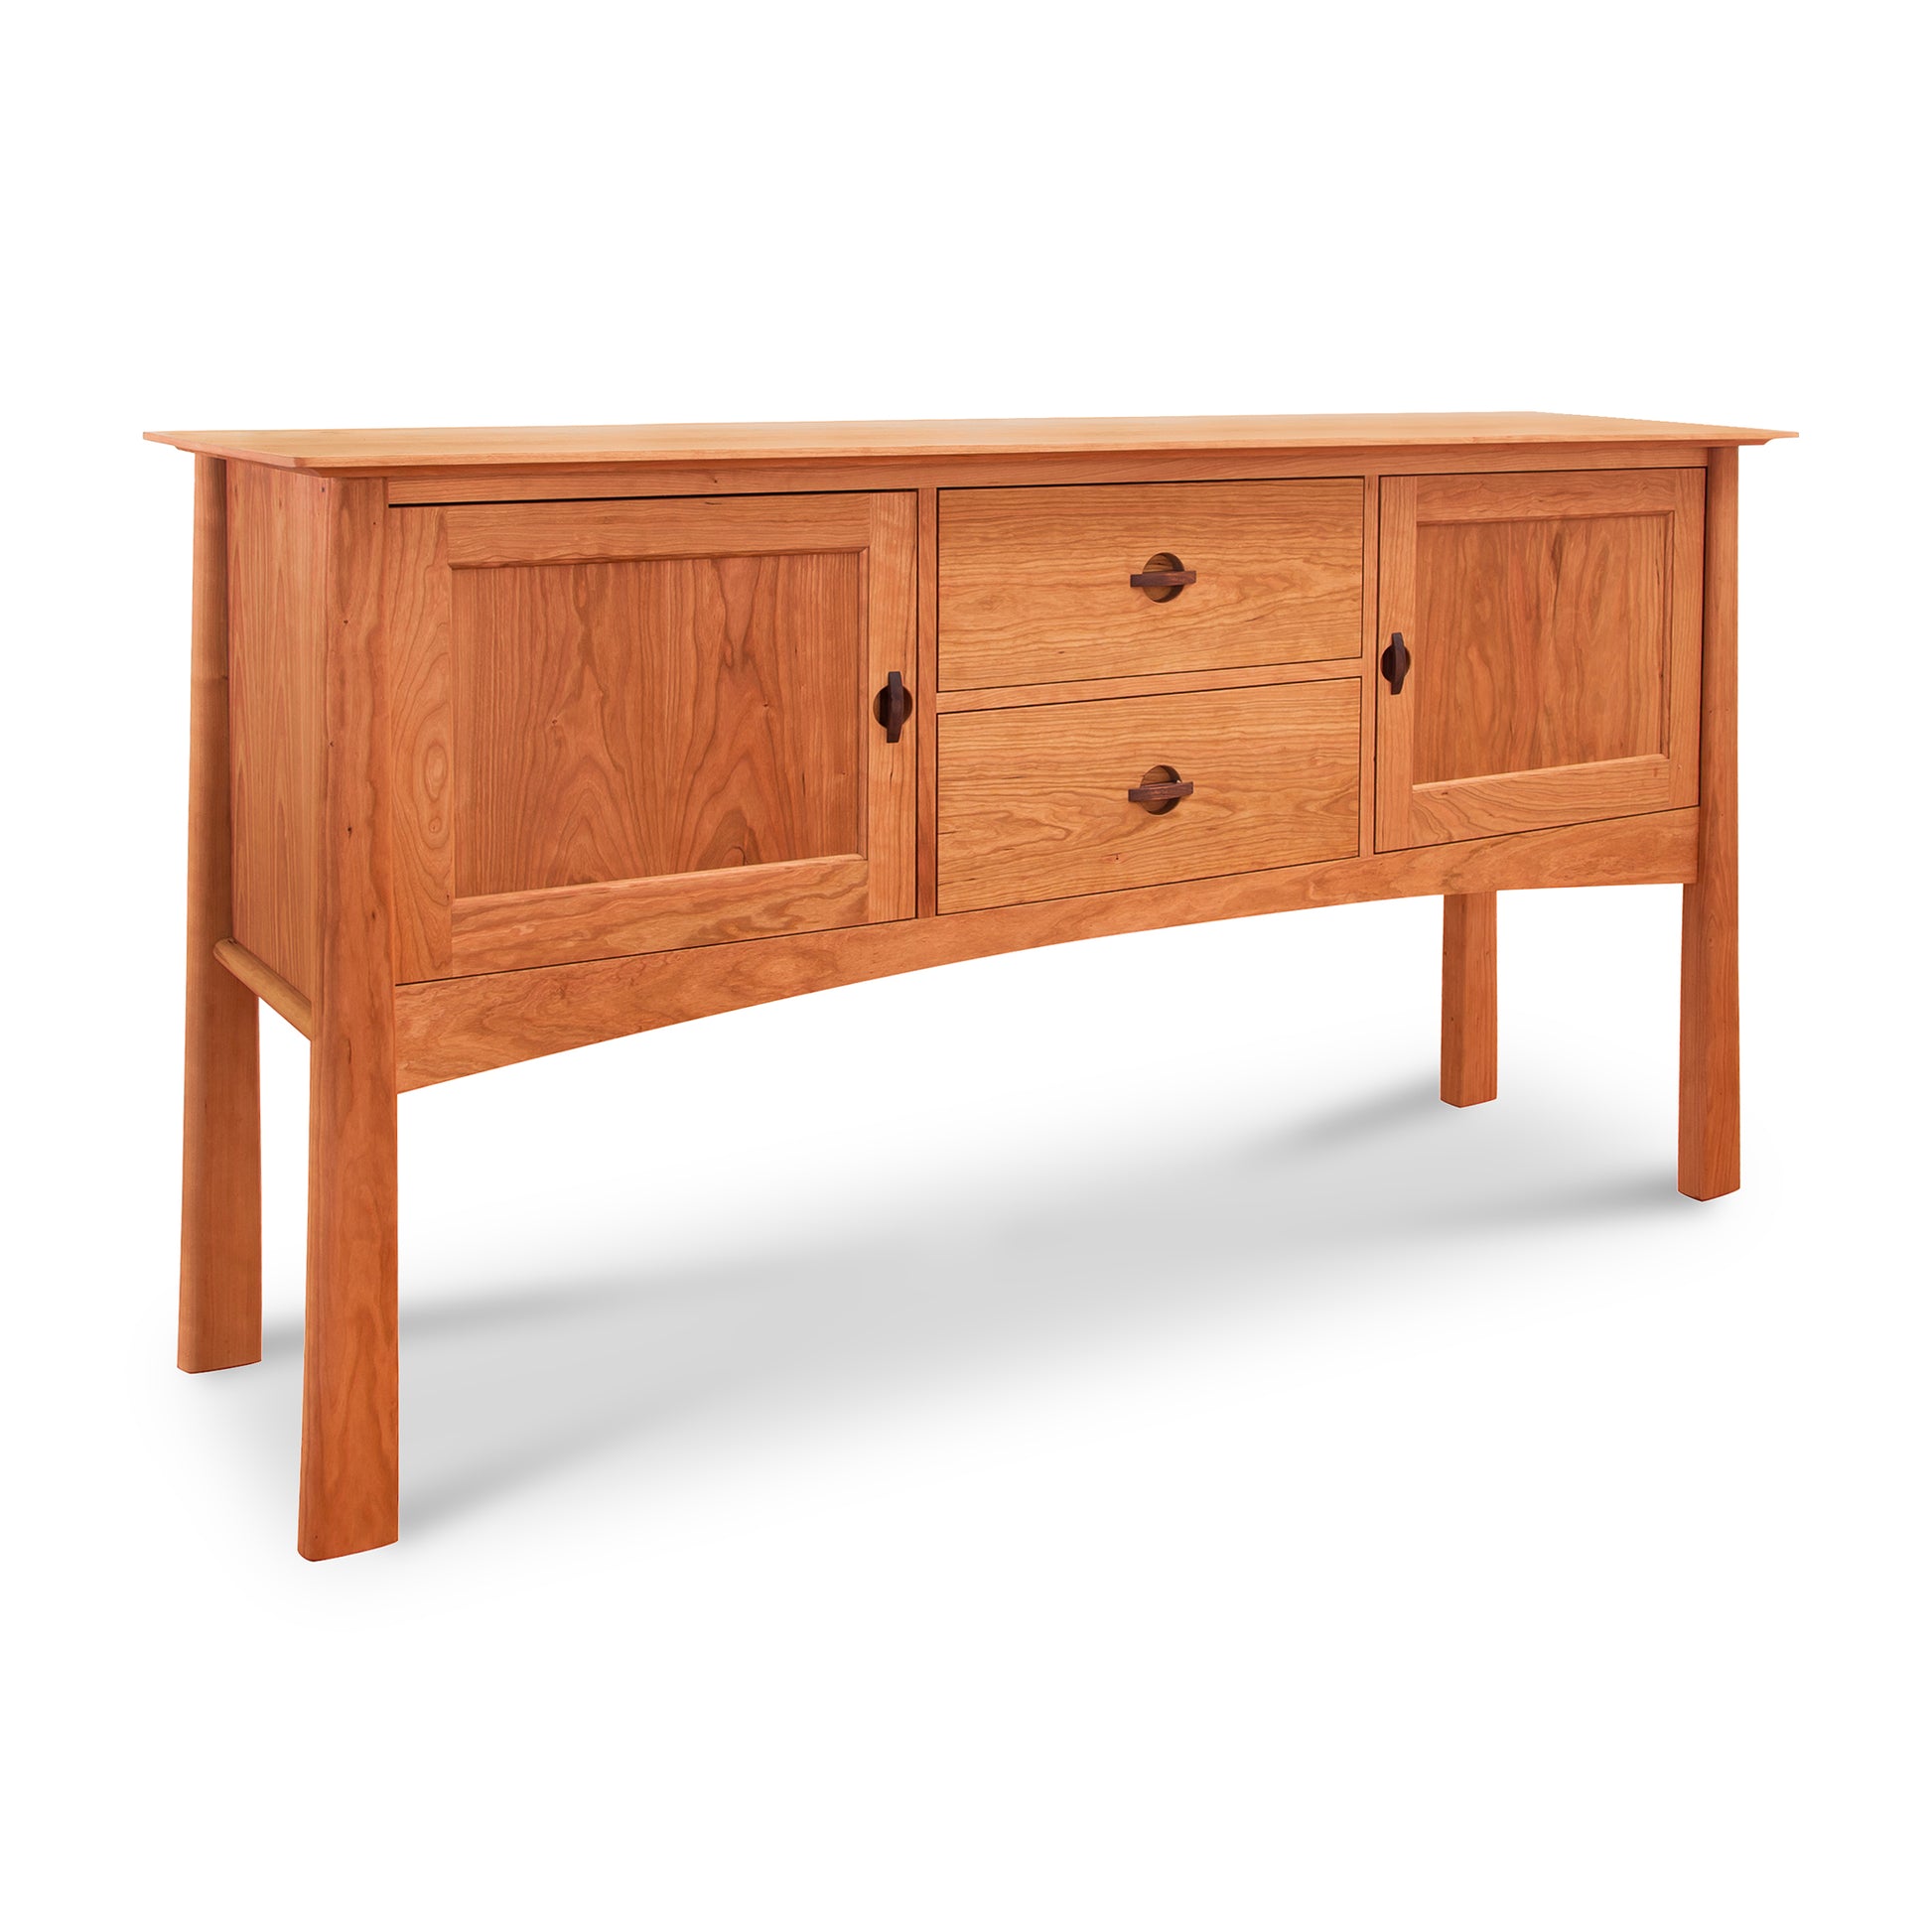 Maple Corner Woodworks Cherry Moon Hunt Board sideboard with three drawers and two cabinets on a white background, crafted from natural hardwoods.